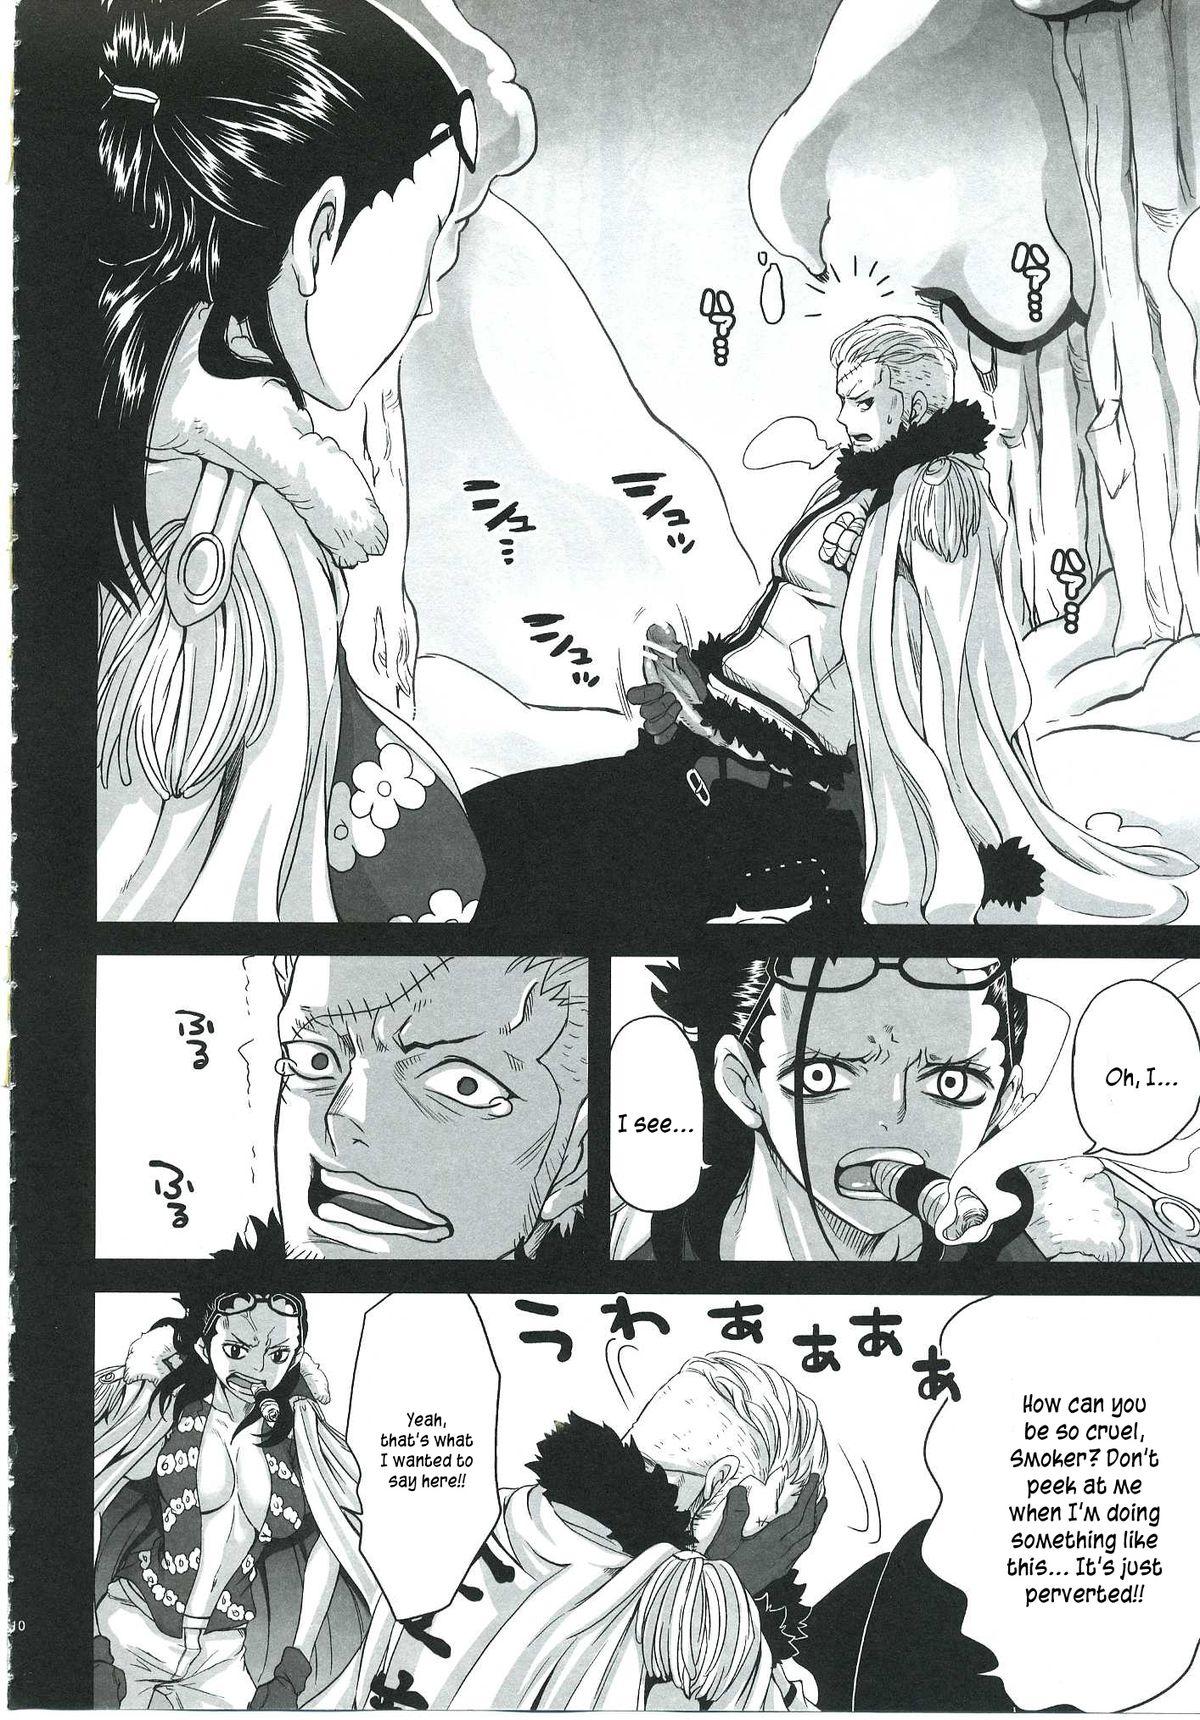 And Exchange - One piece Gemendo - Page 7